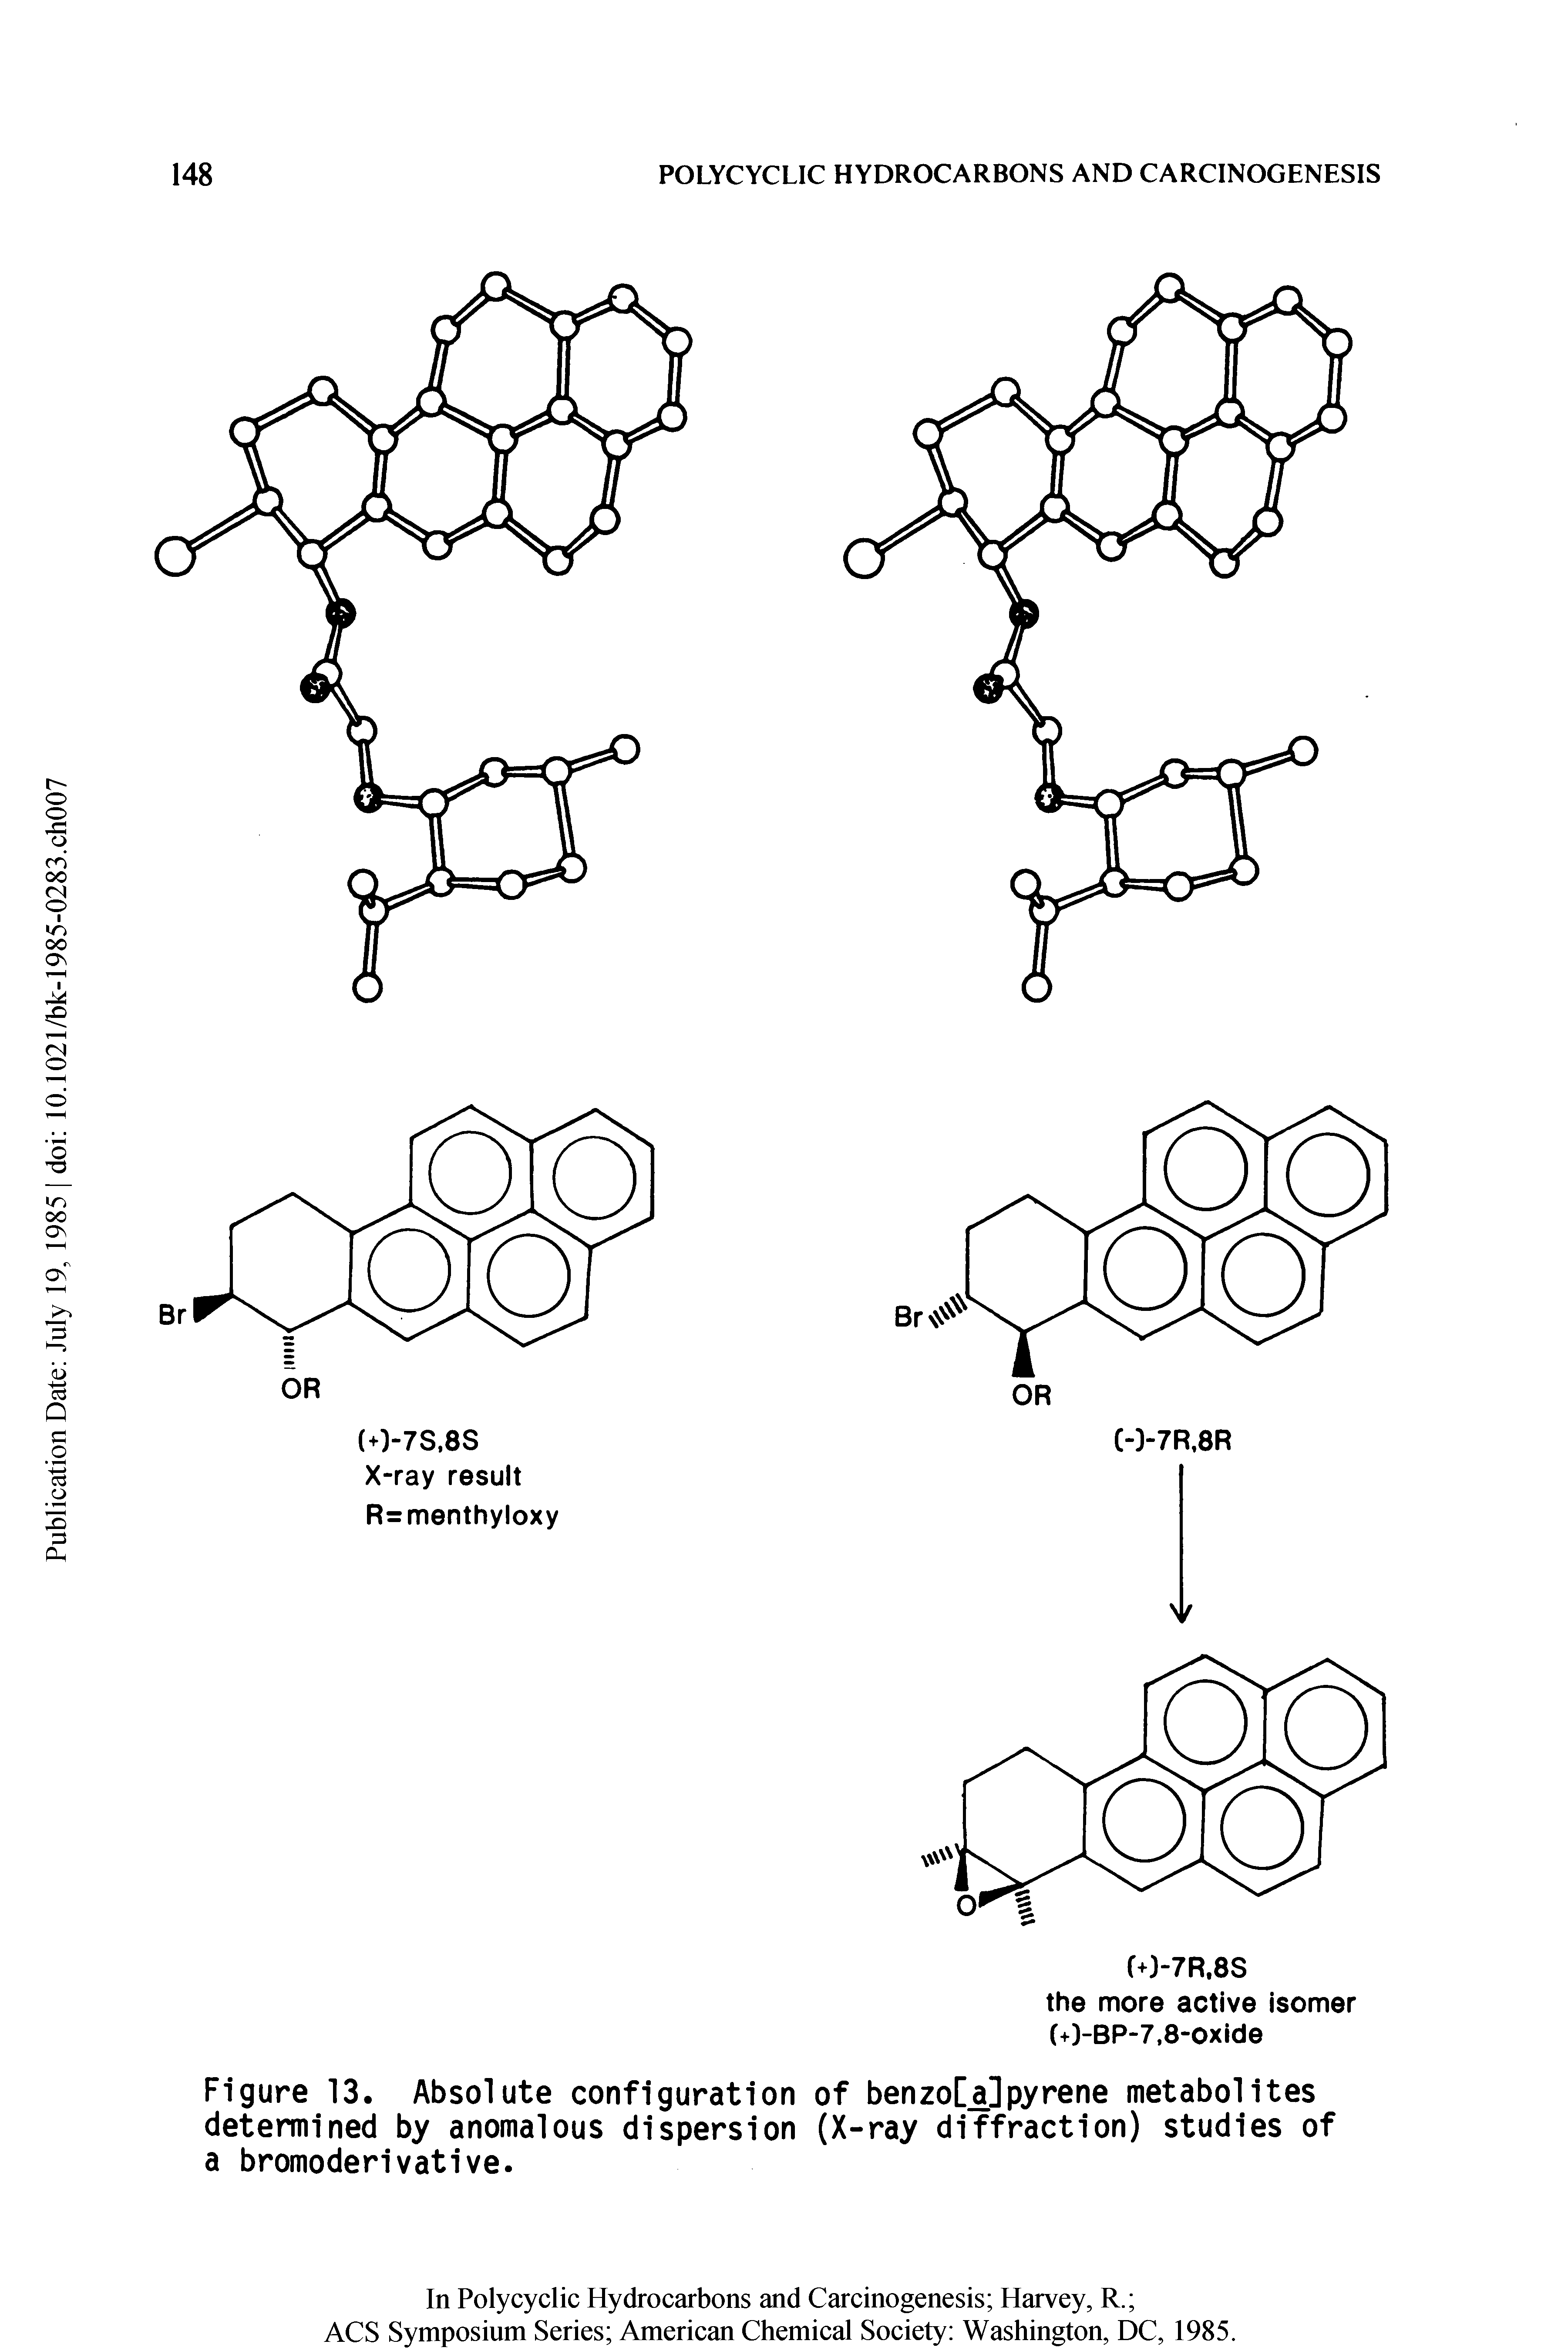 Figure 13. Absolute configuration of benzo[a]pyrene metabolites determined by anomalous dispersion (X-ray diffraction) studies of a bromoderivative.